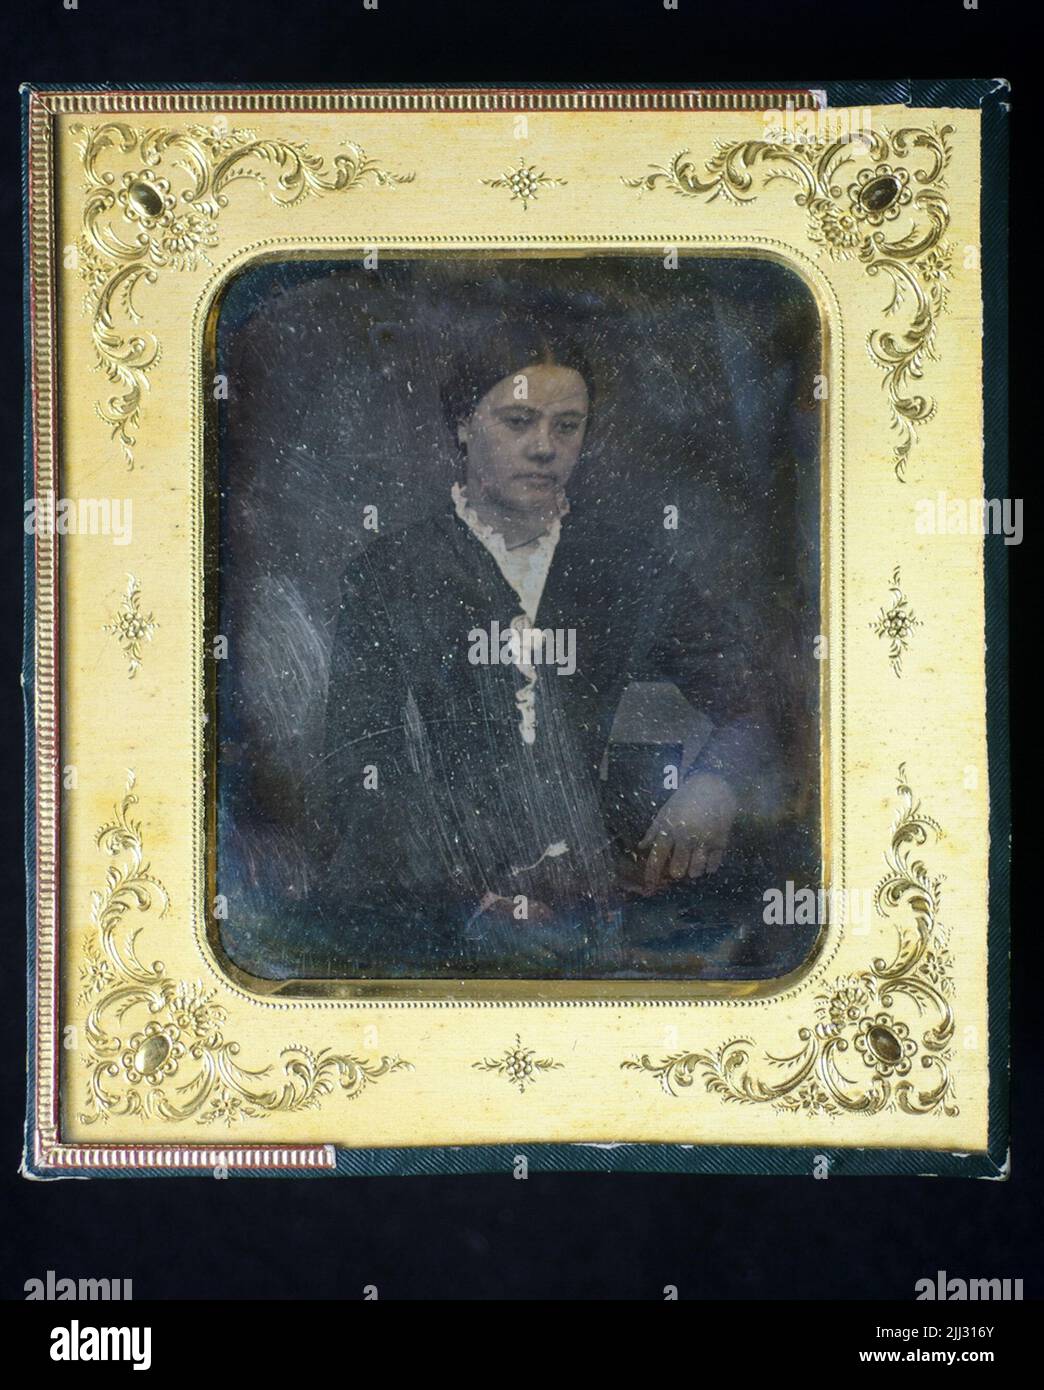 Daguerreotype A woman's portrait by Anna Elisabeth Svensson, Ringshyttan, at 17 1/2 years of age. Stock Photo